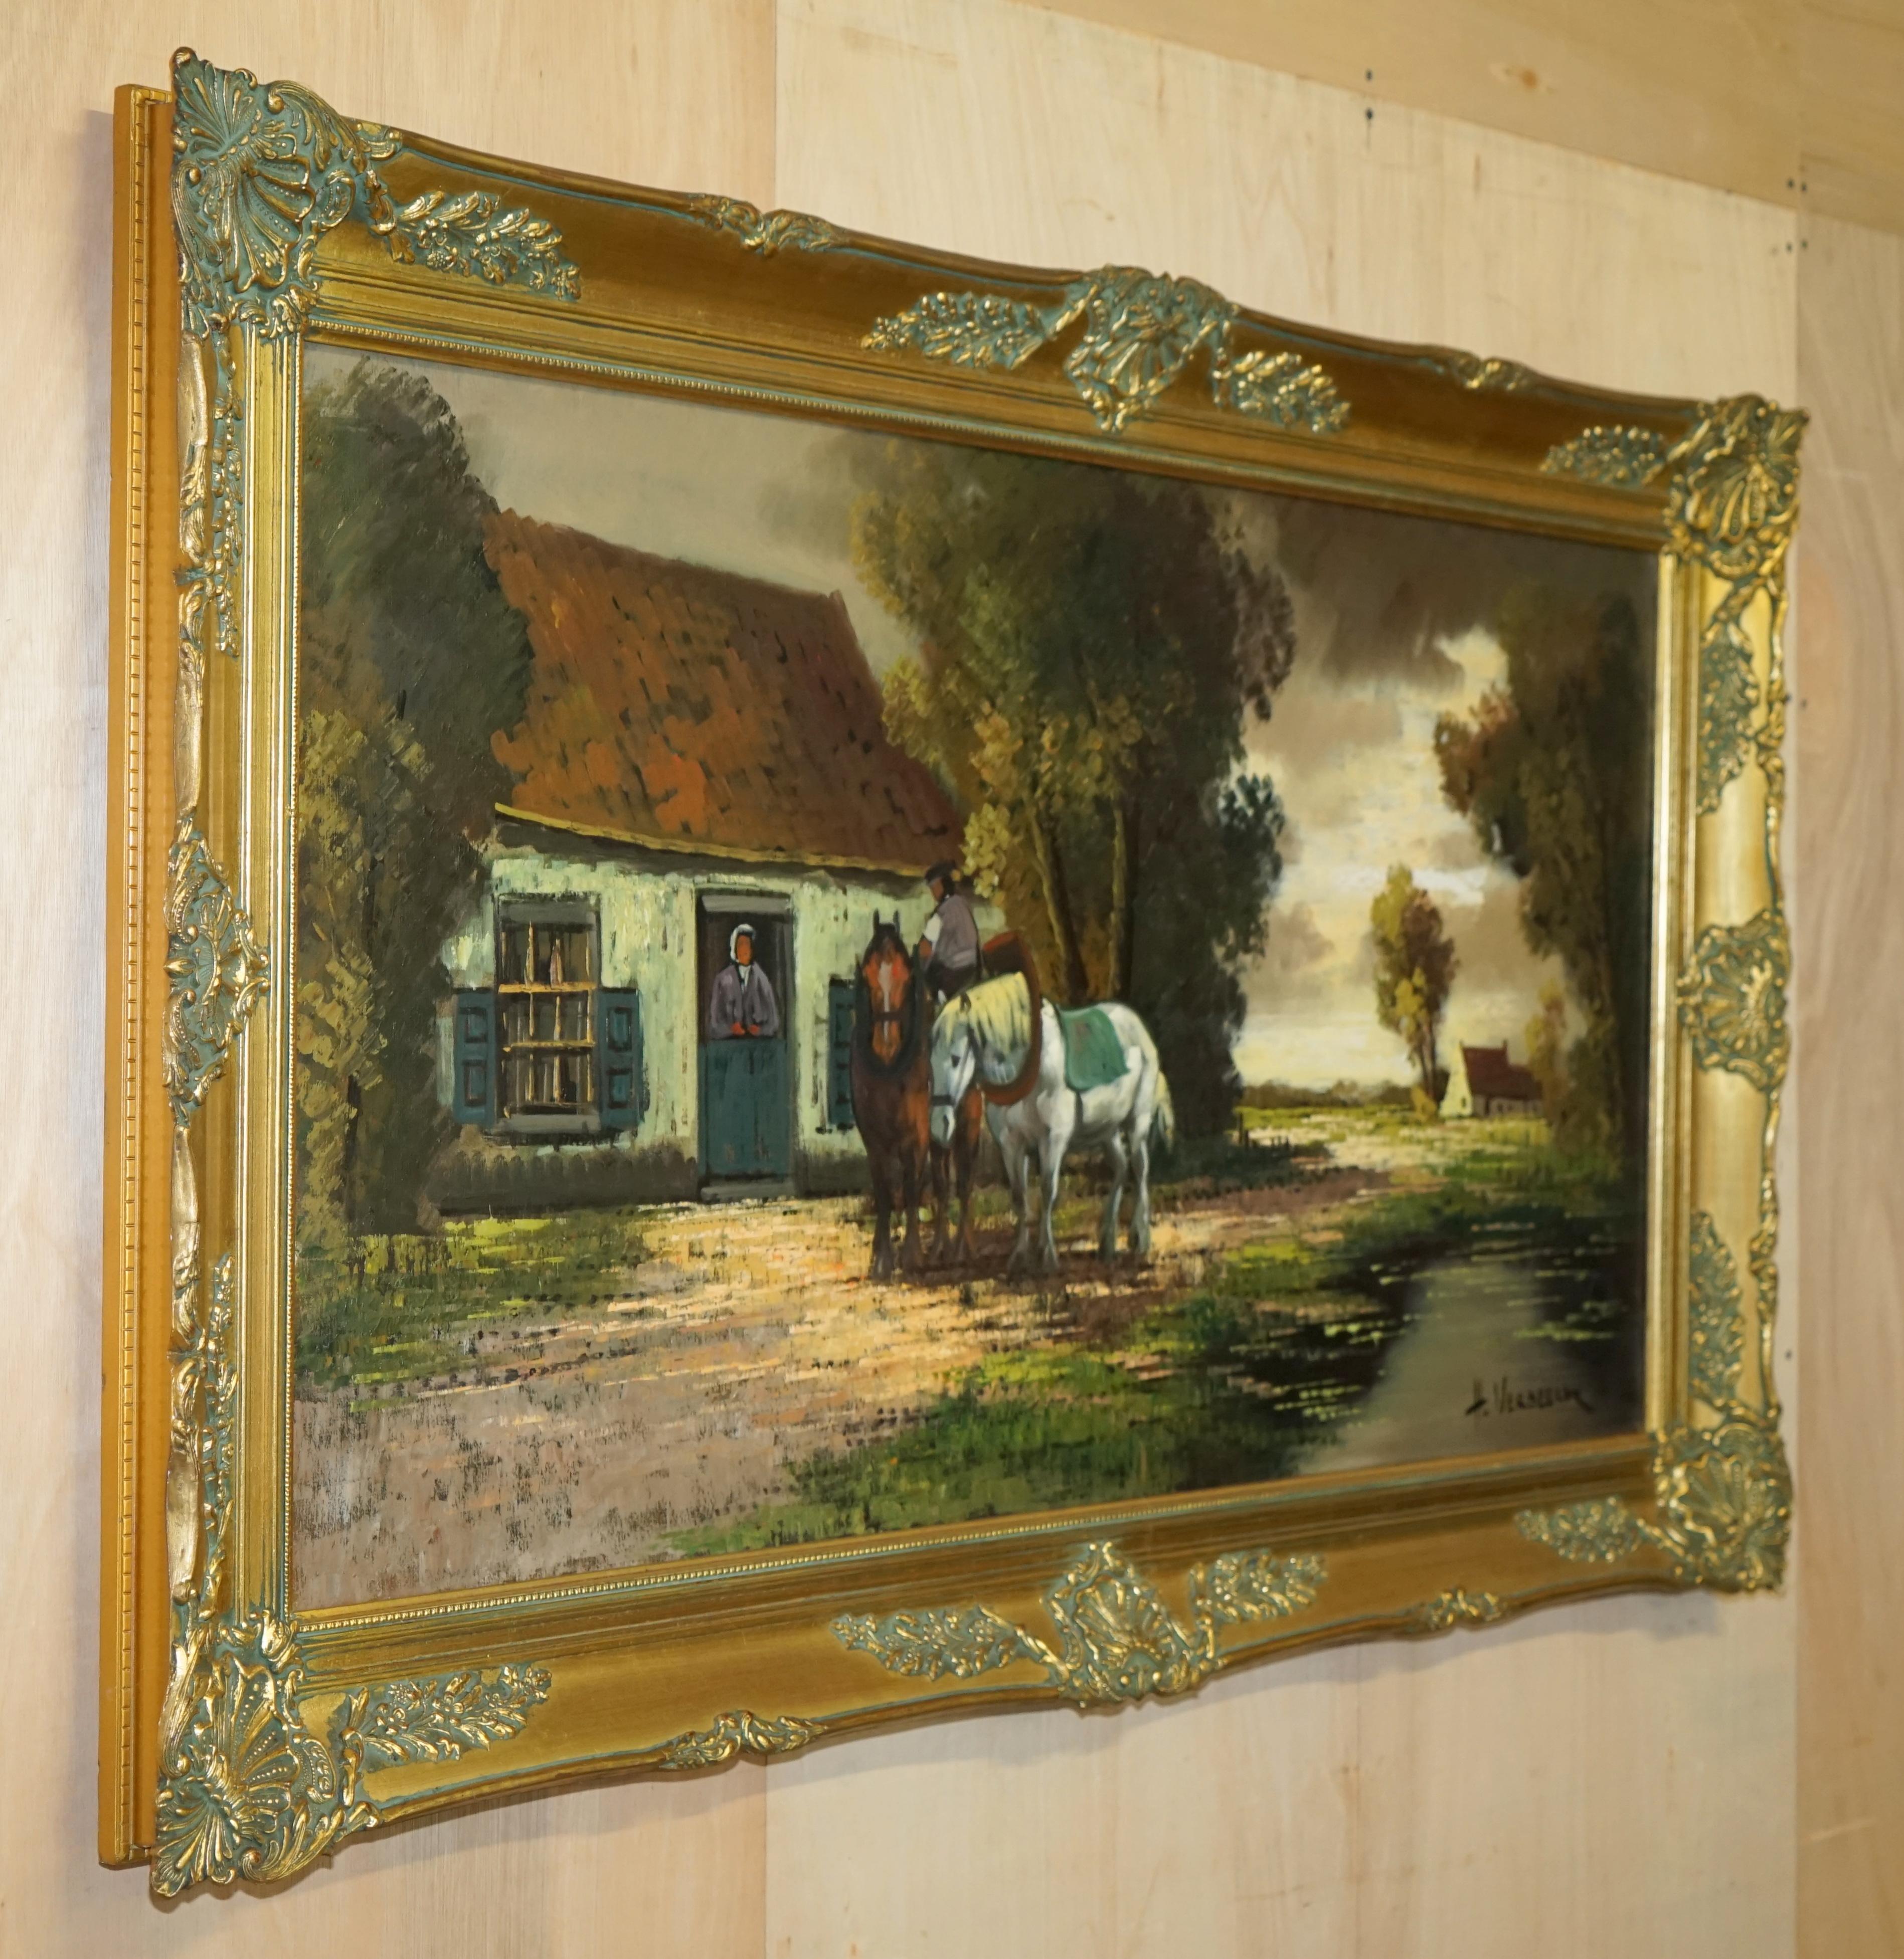 EXTRA LARGE 159X94CM H. VERBEELK SiGNED OIL PAINTING OF A RURAL SCENE WITH HORSE For Sale 10